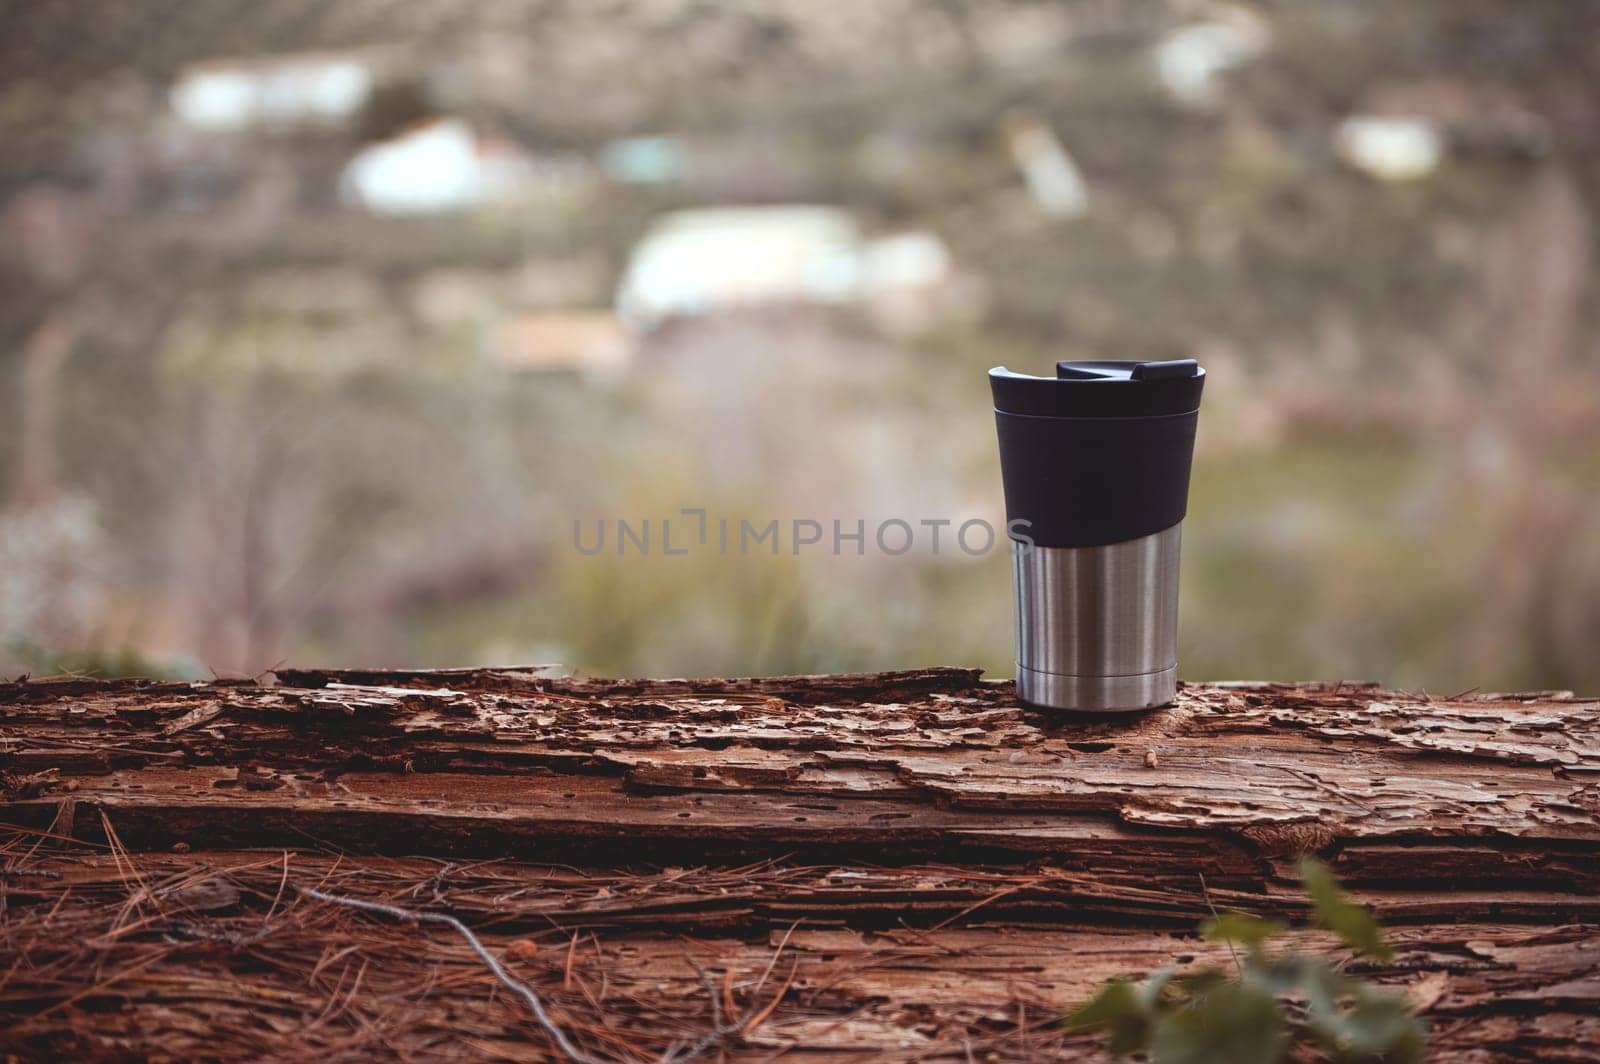 Horizontal shot of travel mug on a log over blur nature background with copy advertising space. A stainless steel cup with hot drink, coffee or tea for a recreation while trekking, hiking, travelling